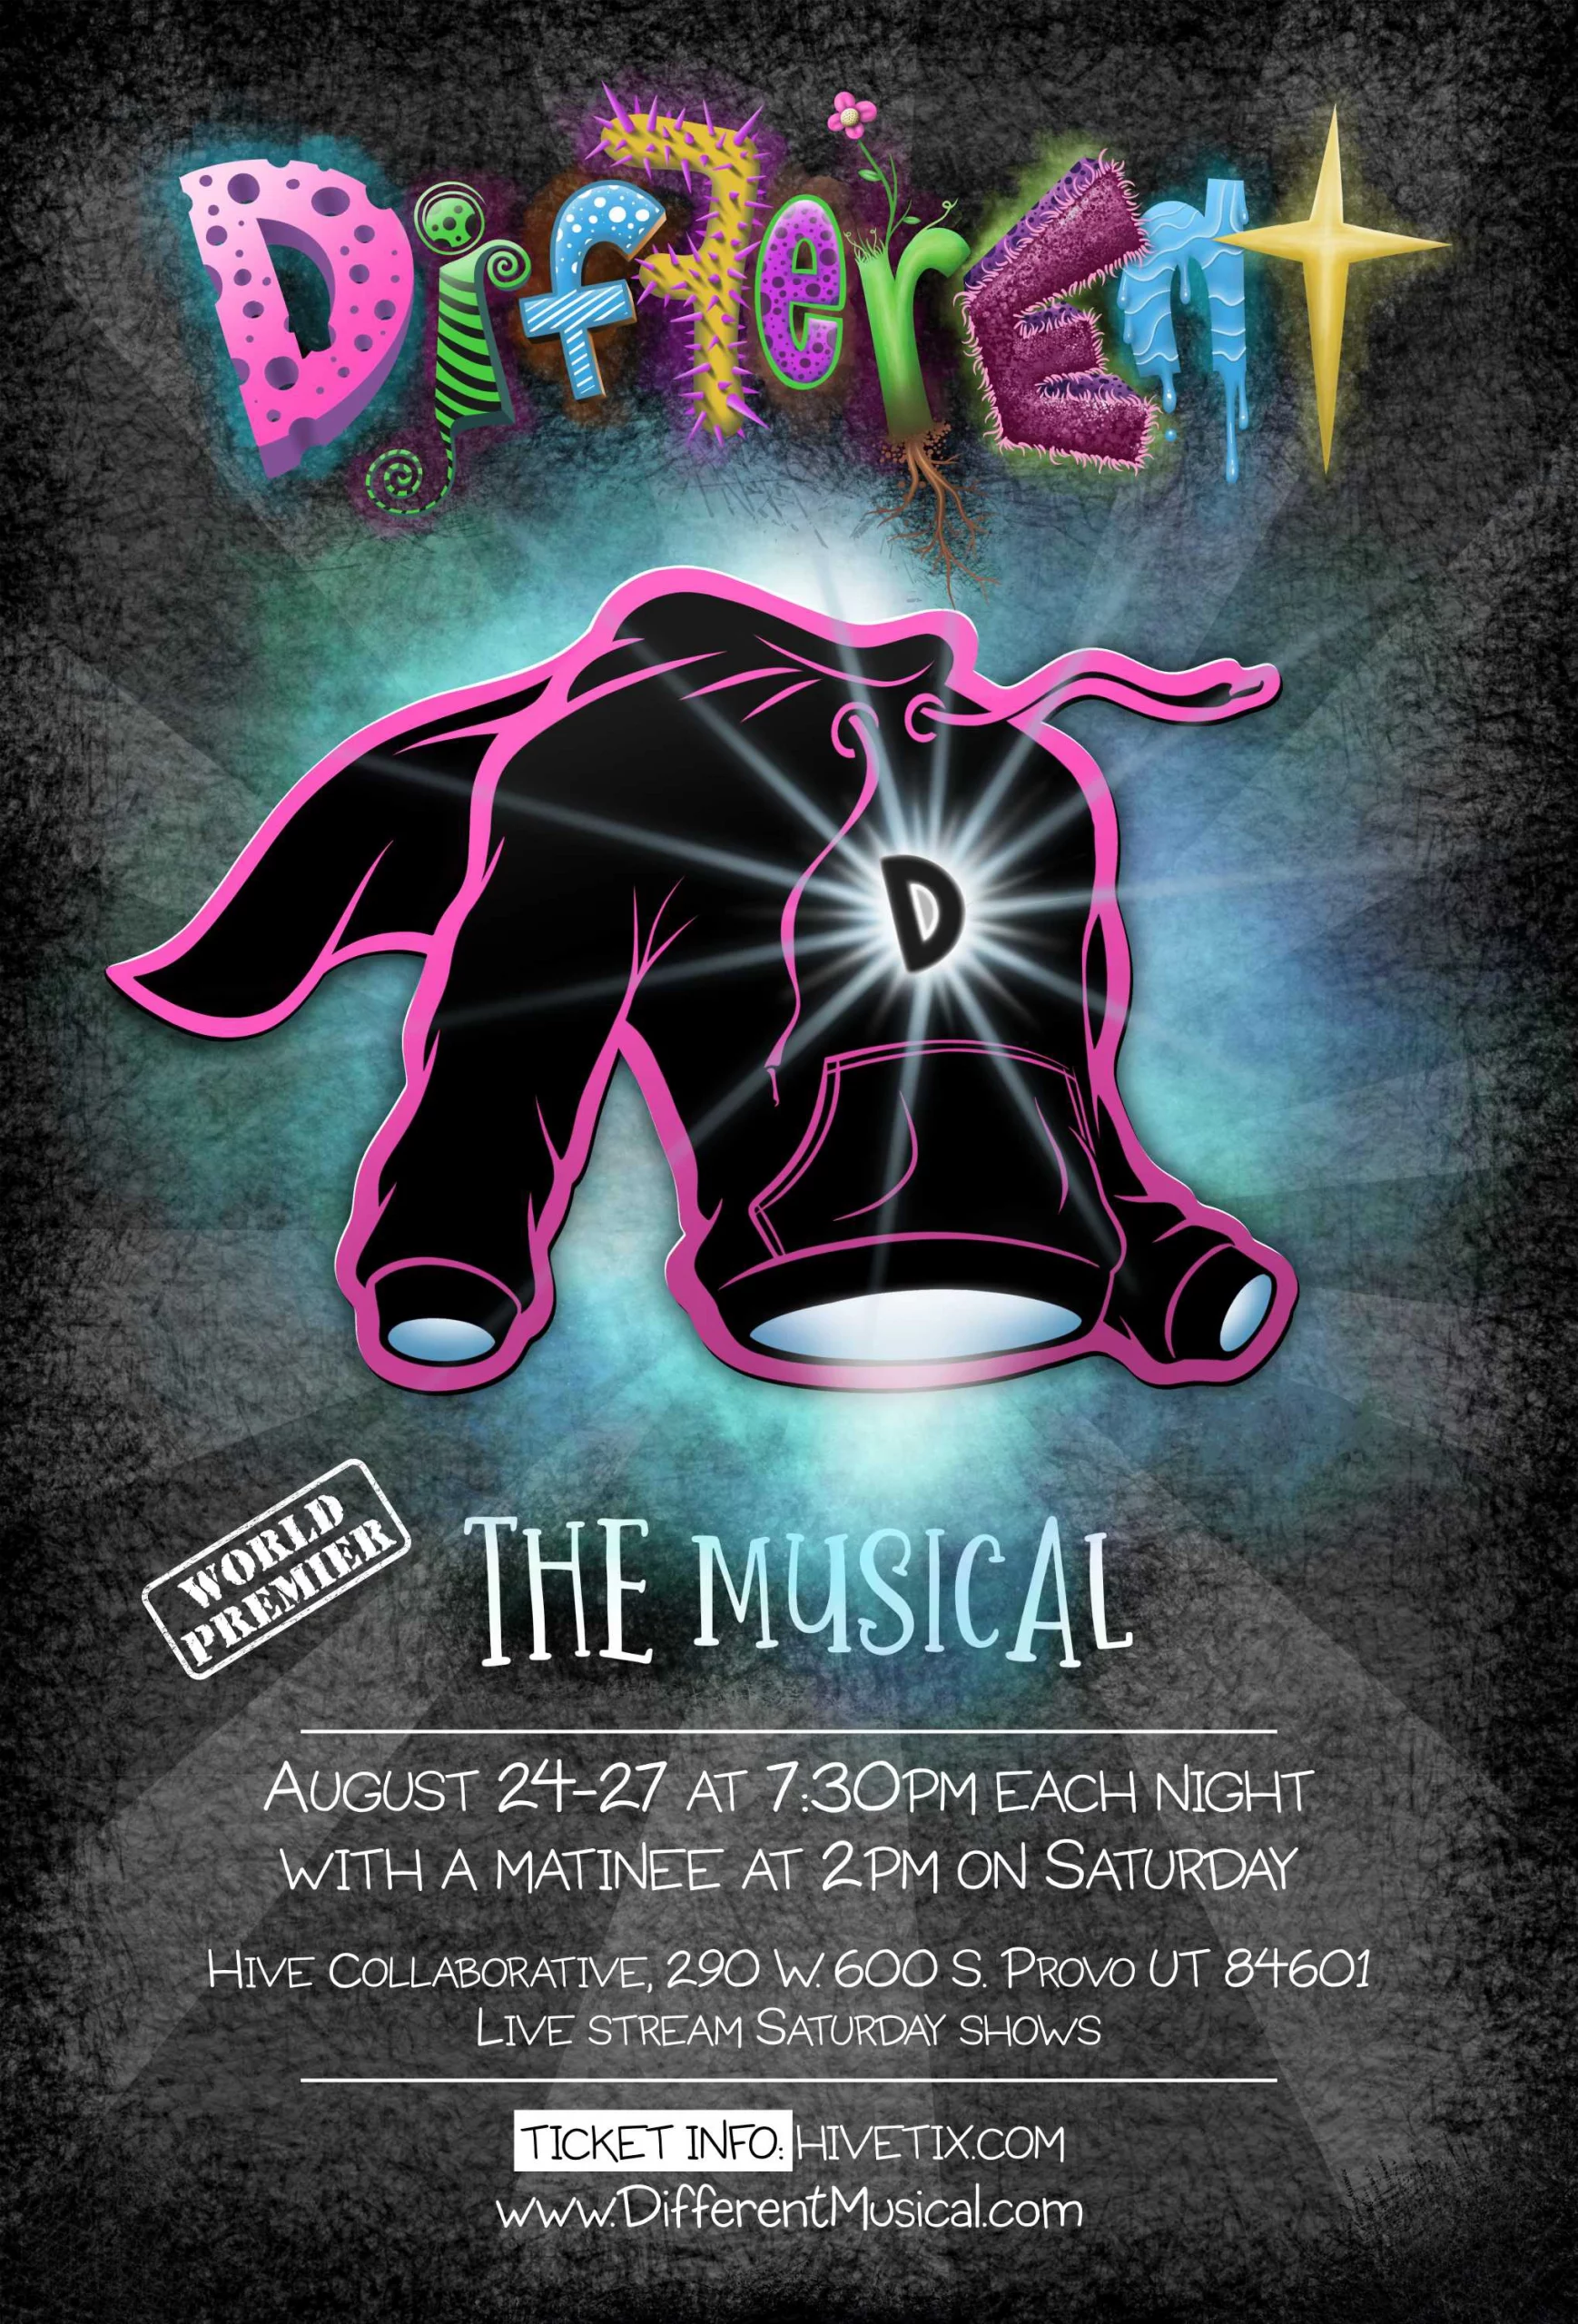 "Different: The Musical" event flyer